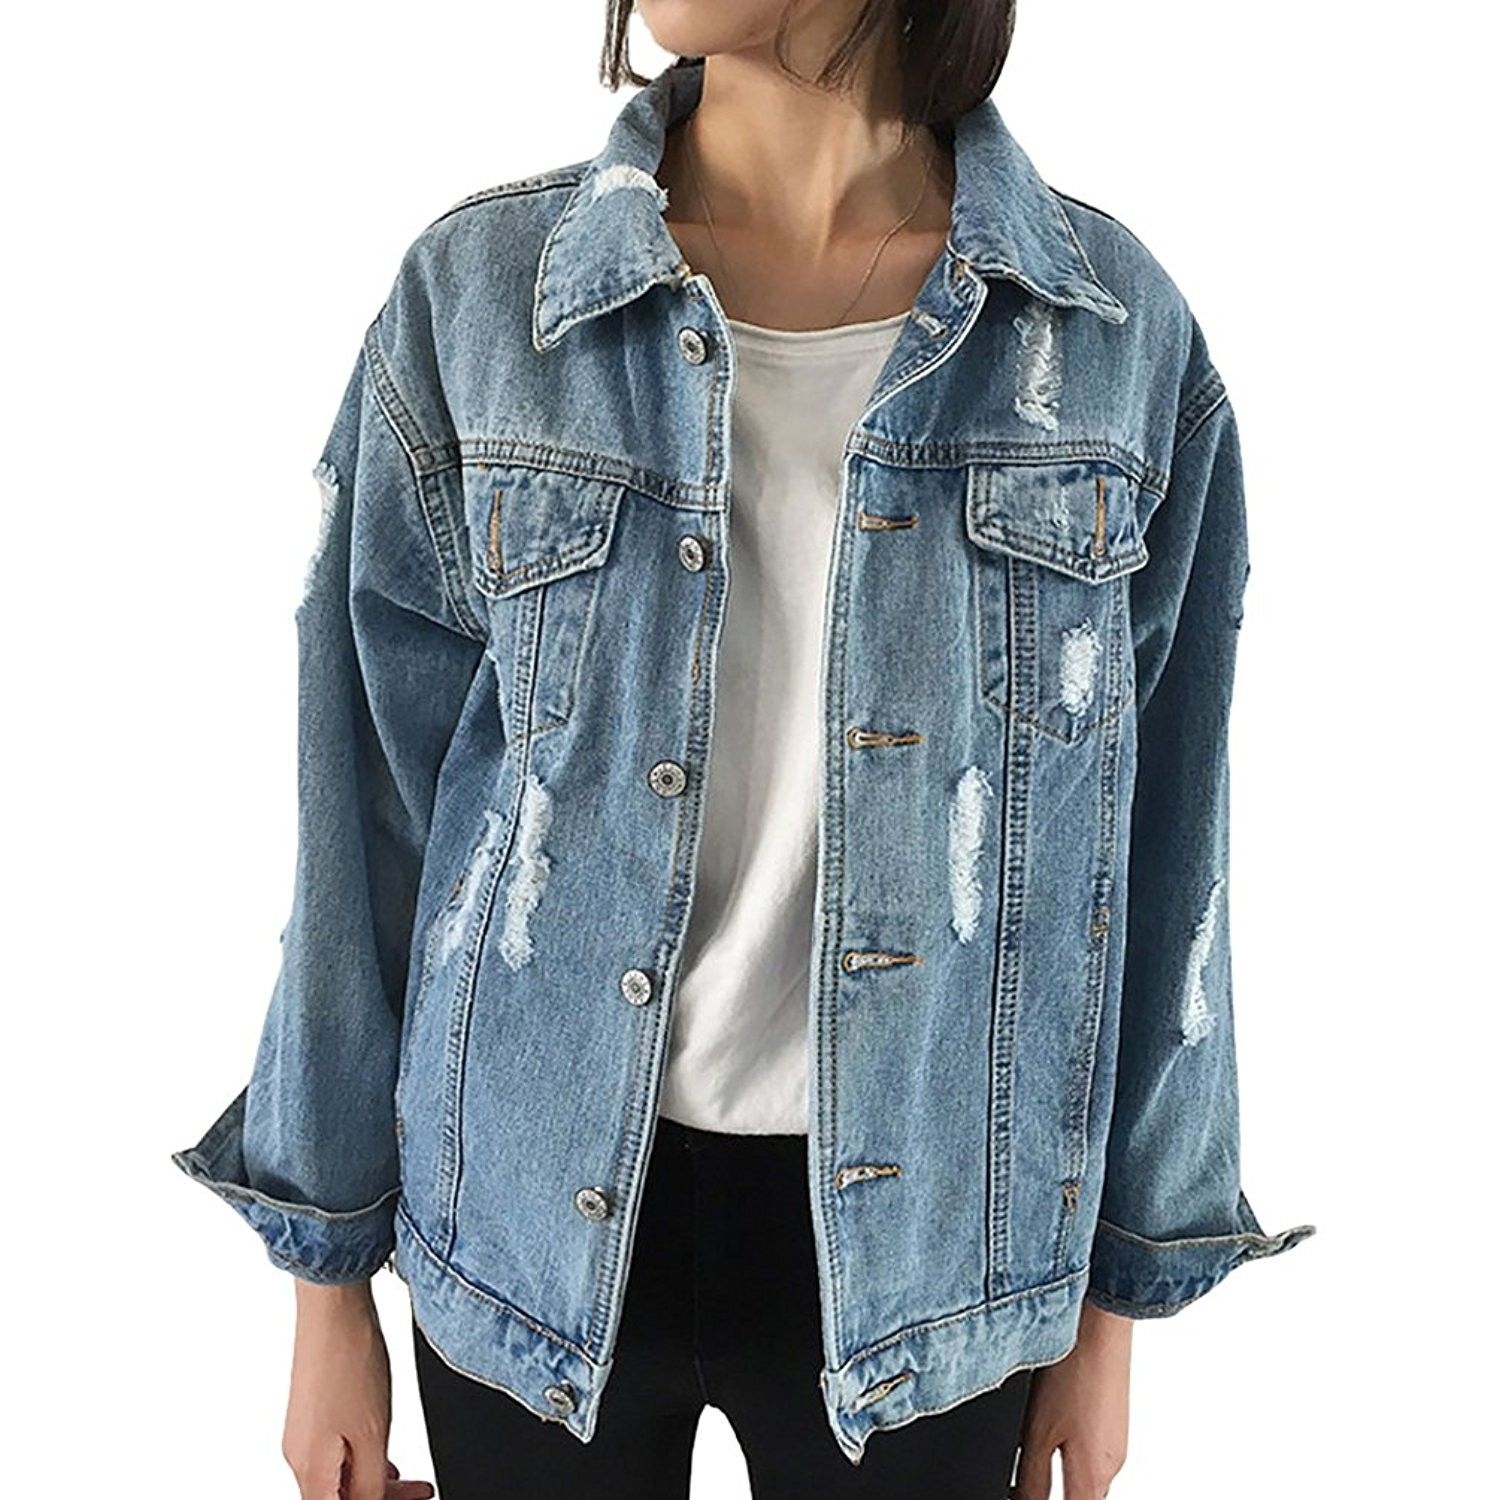 8 incredibly cool ideas for DIY customized denim jackets | Cool Mom Picks